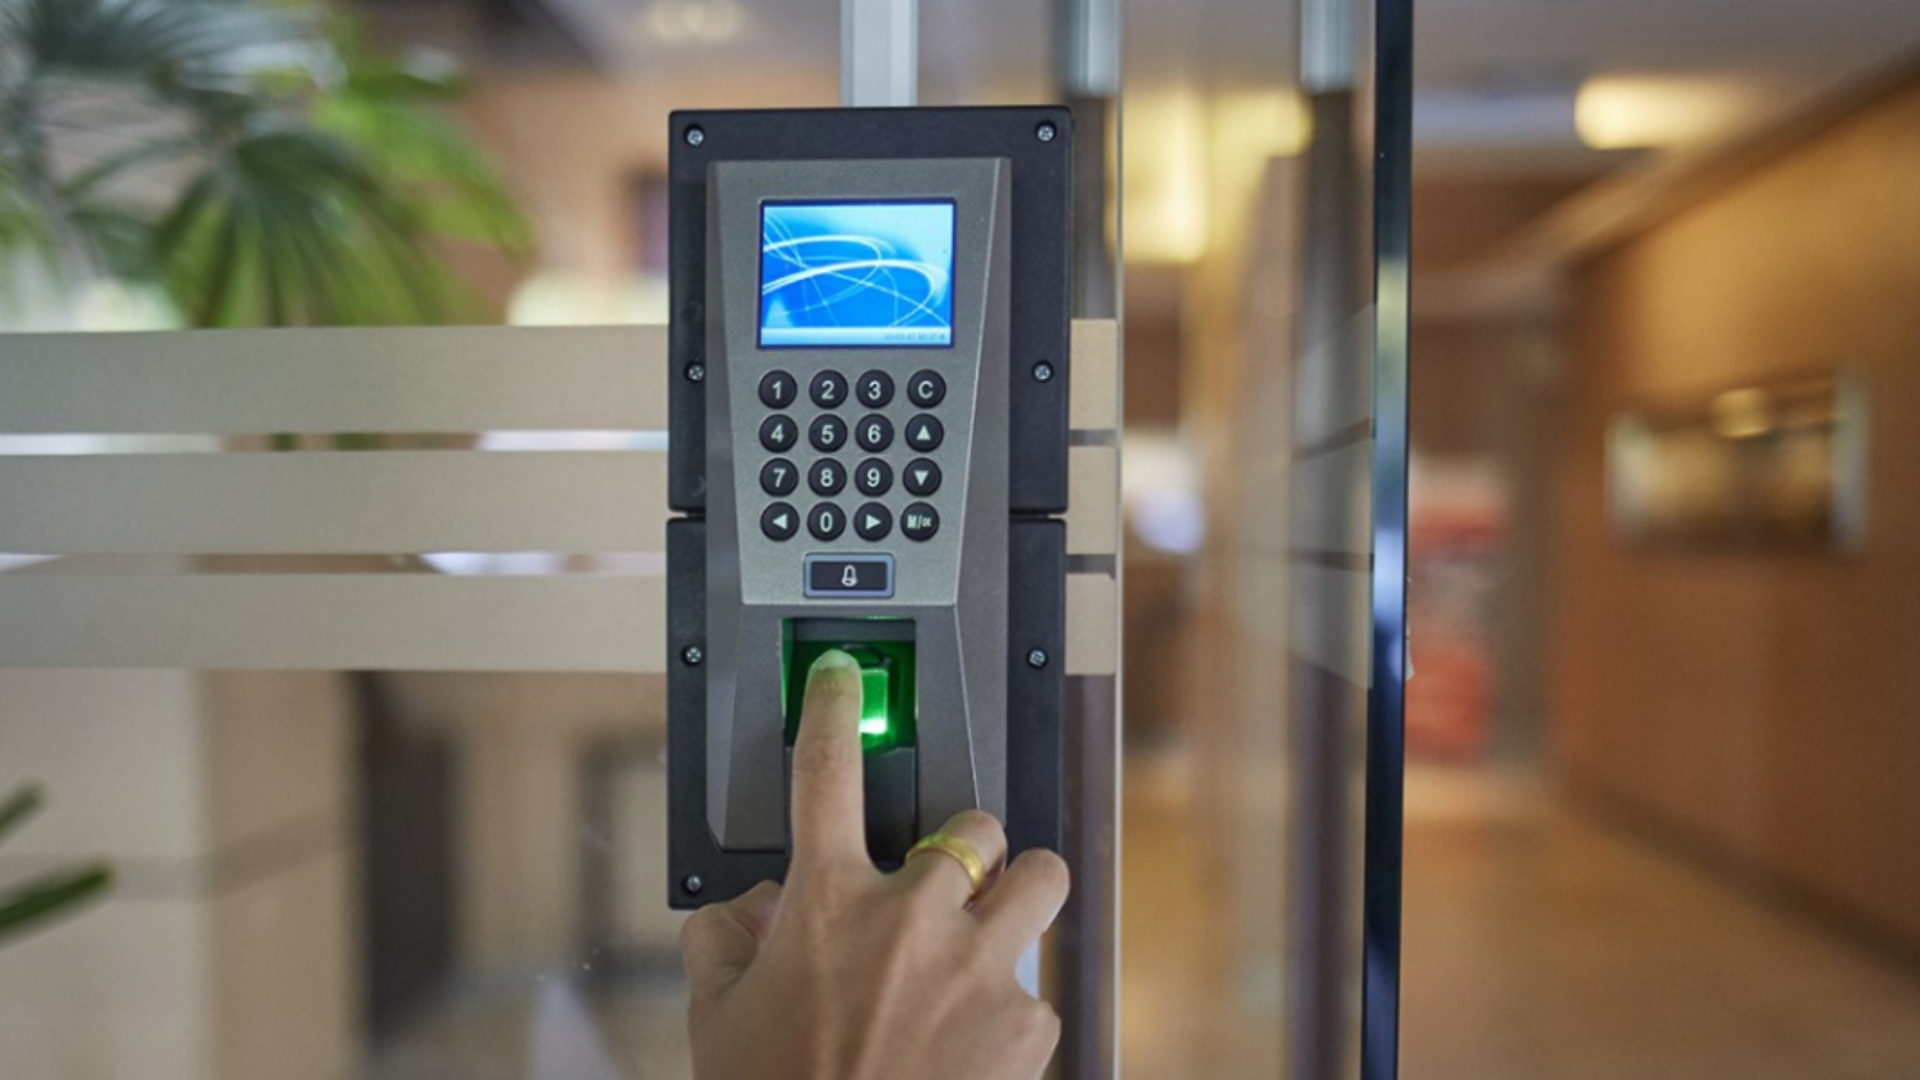 A user scanning their fingerprint on biometric lock. Electronic locks are a type of high-security locks.